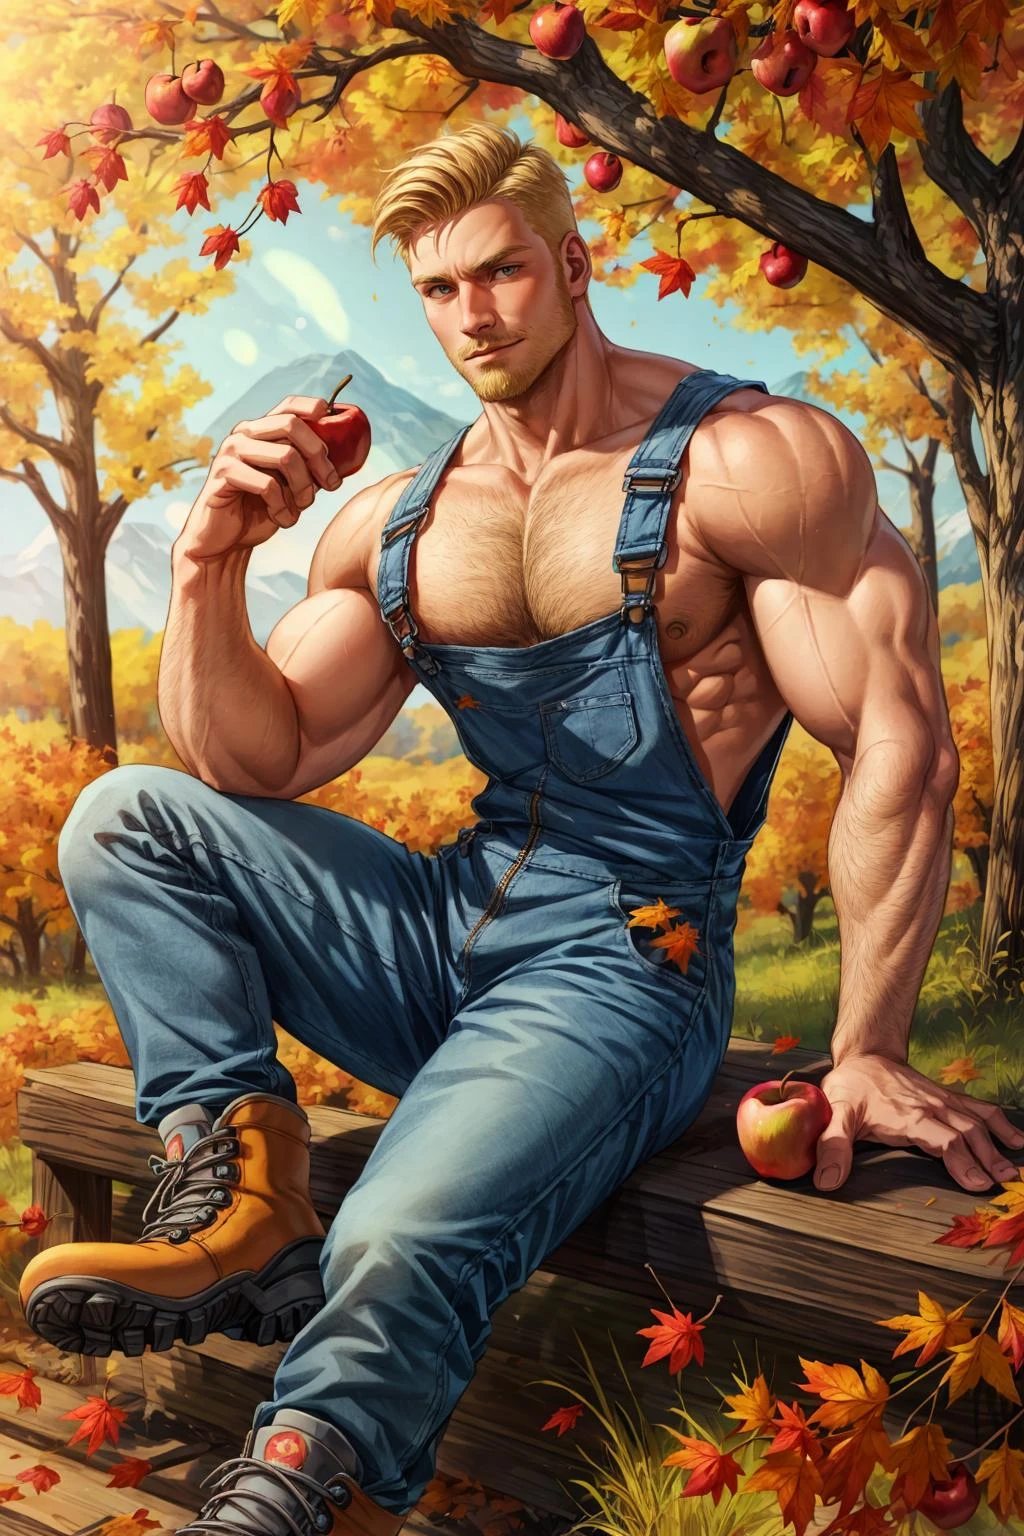 1boy, a muscular man wearing overalls and hiking boots, blonde hair, hairy chest, autumn, falling leaves, apple orchard, warm lighting,